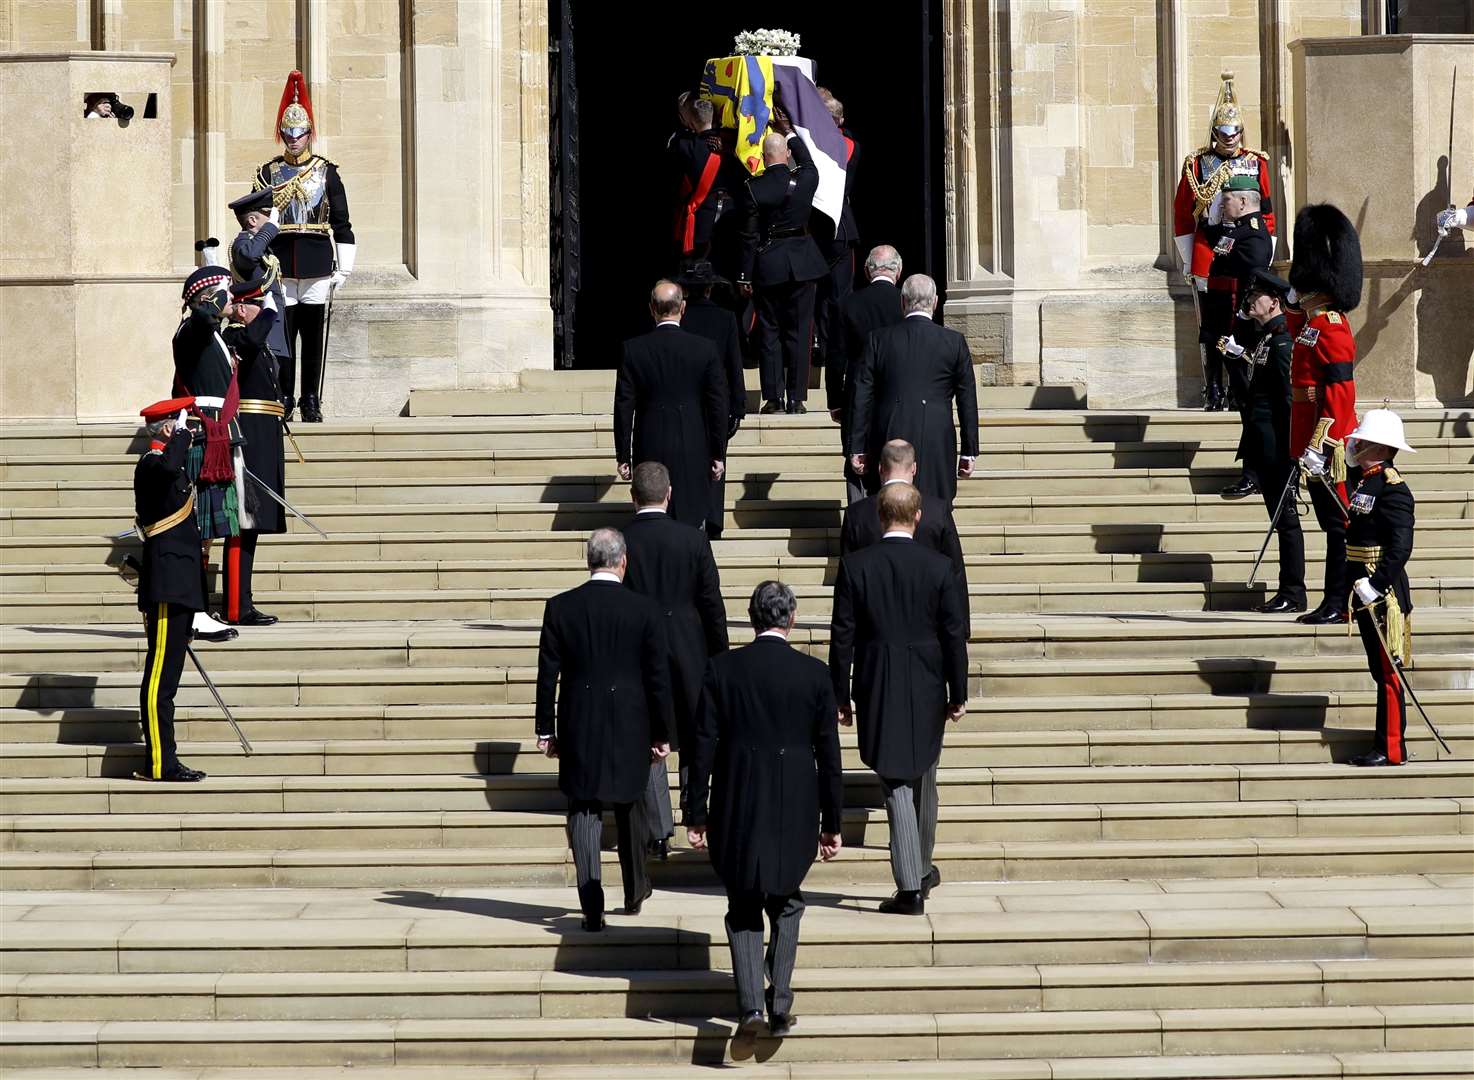 The Duke of Edinburgh’s coffin is taken into the chapel, followed by members of his family (Kirsty Wrigglesworth/PA)